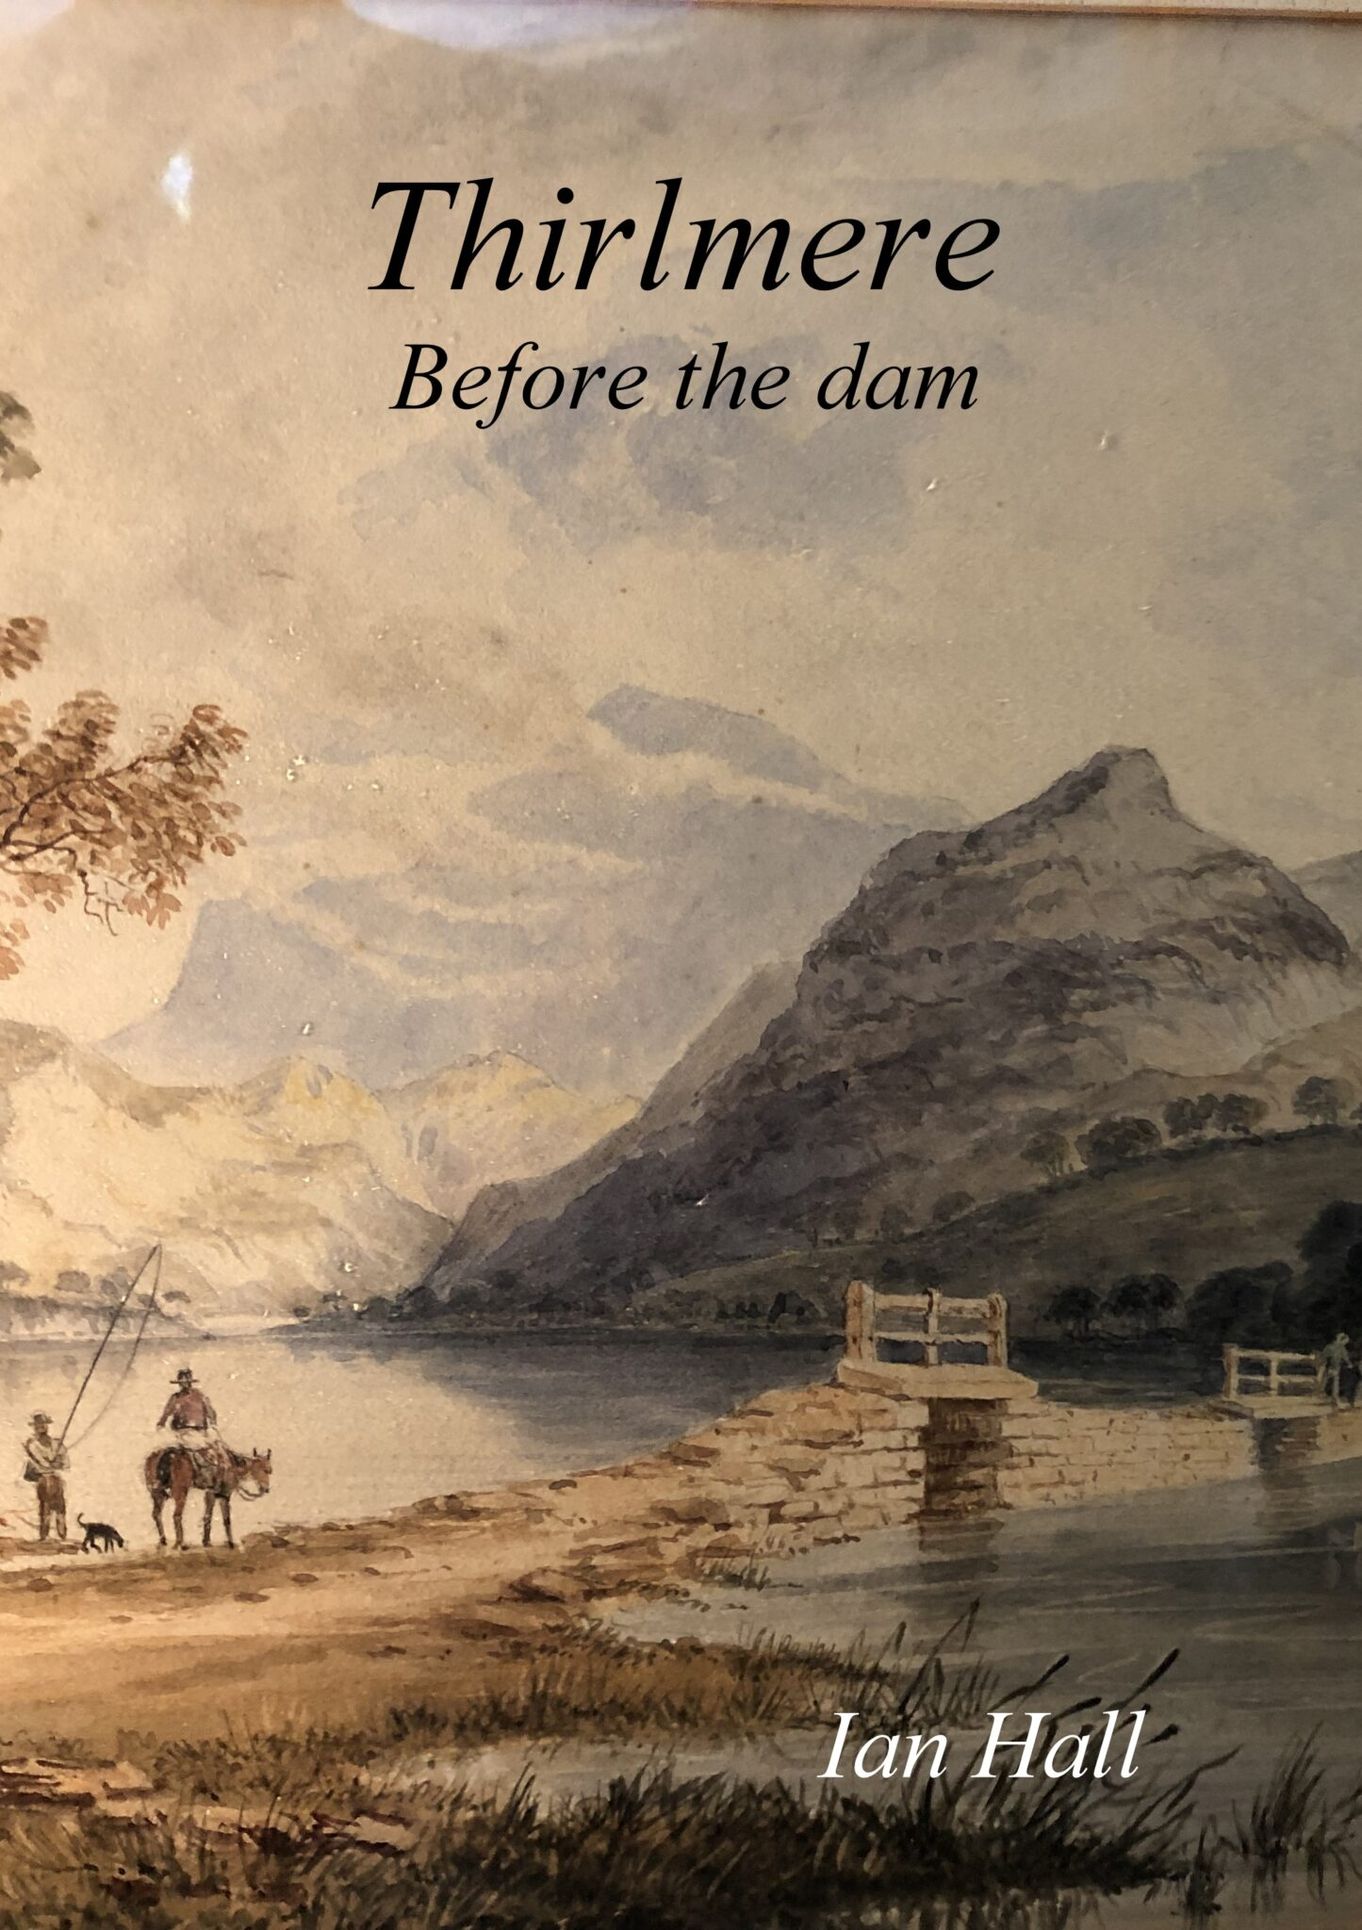 Thirlmere Be-dammed: The story of Thirlmere before & after the reservoir